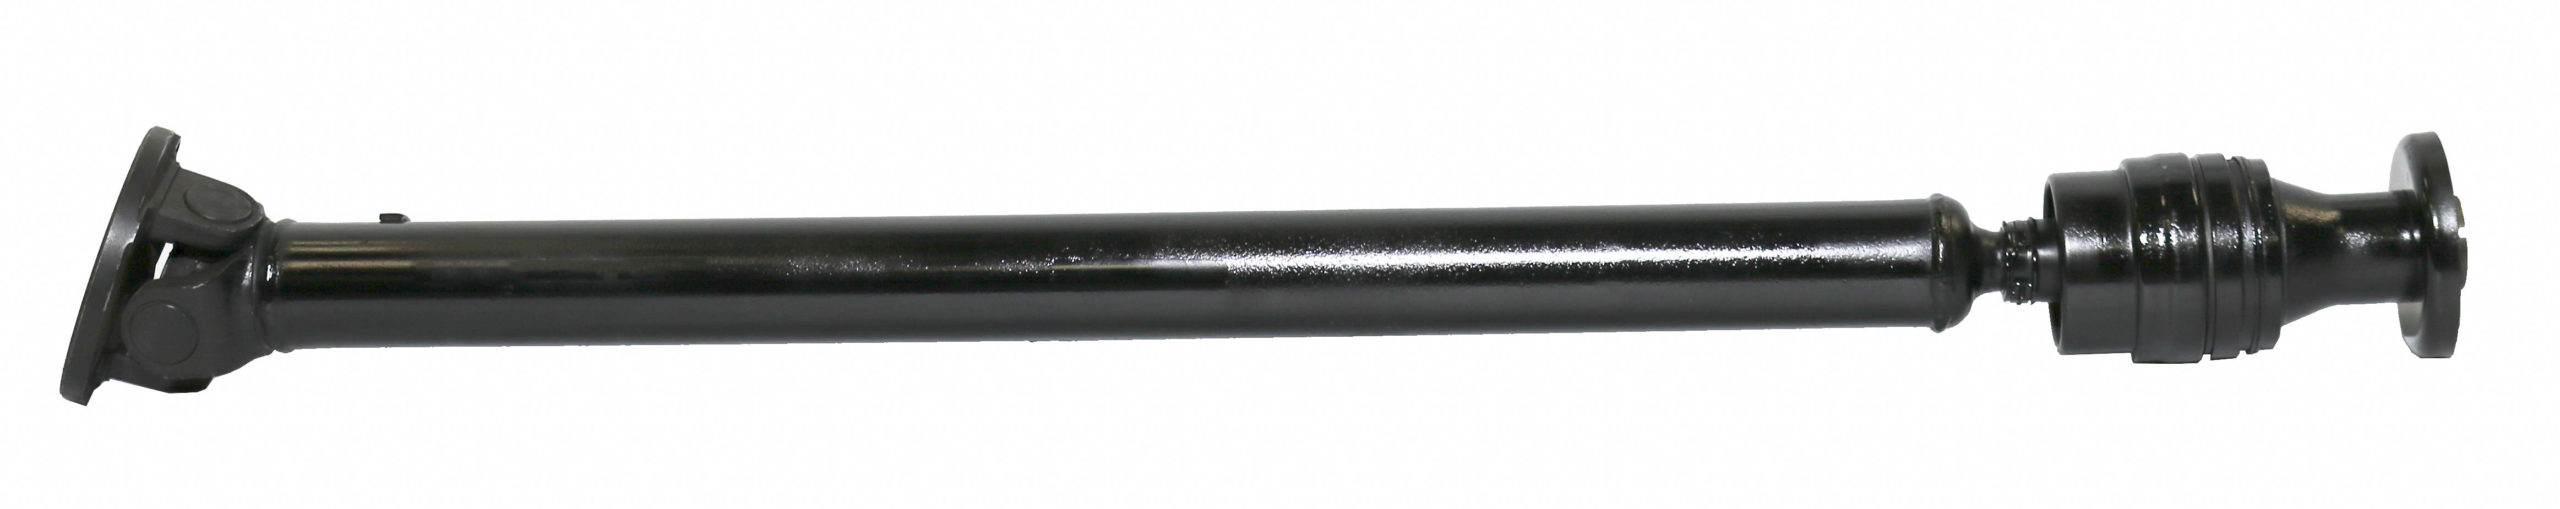 Front drive shaft for Chevrolet Astro or GMC Safari.